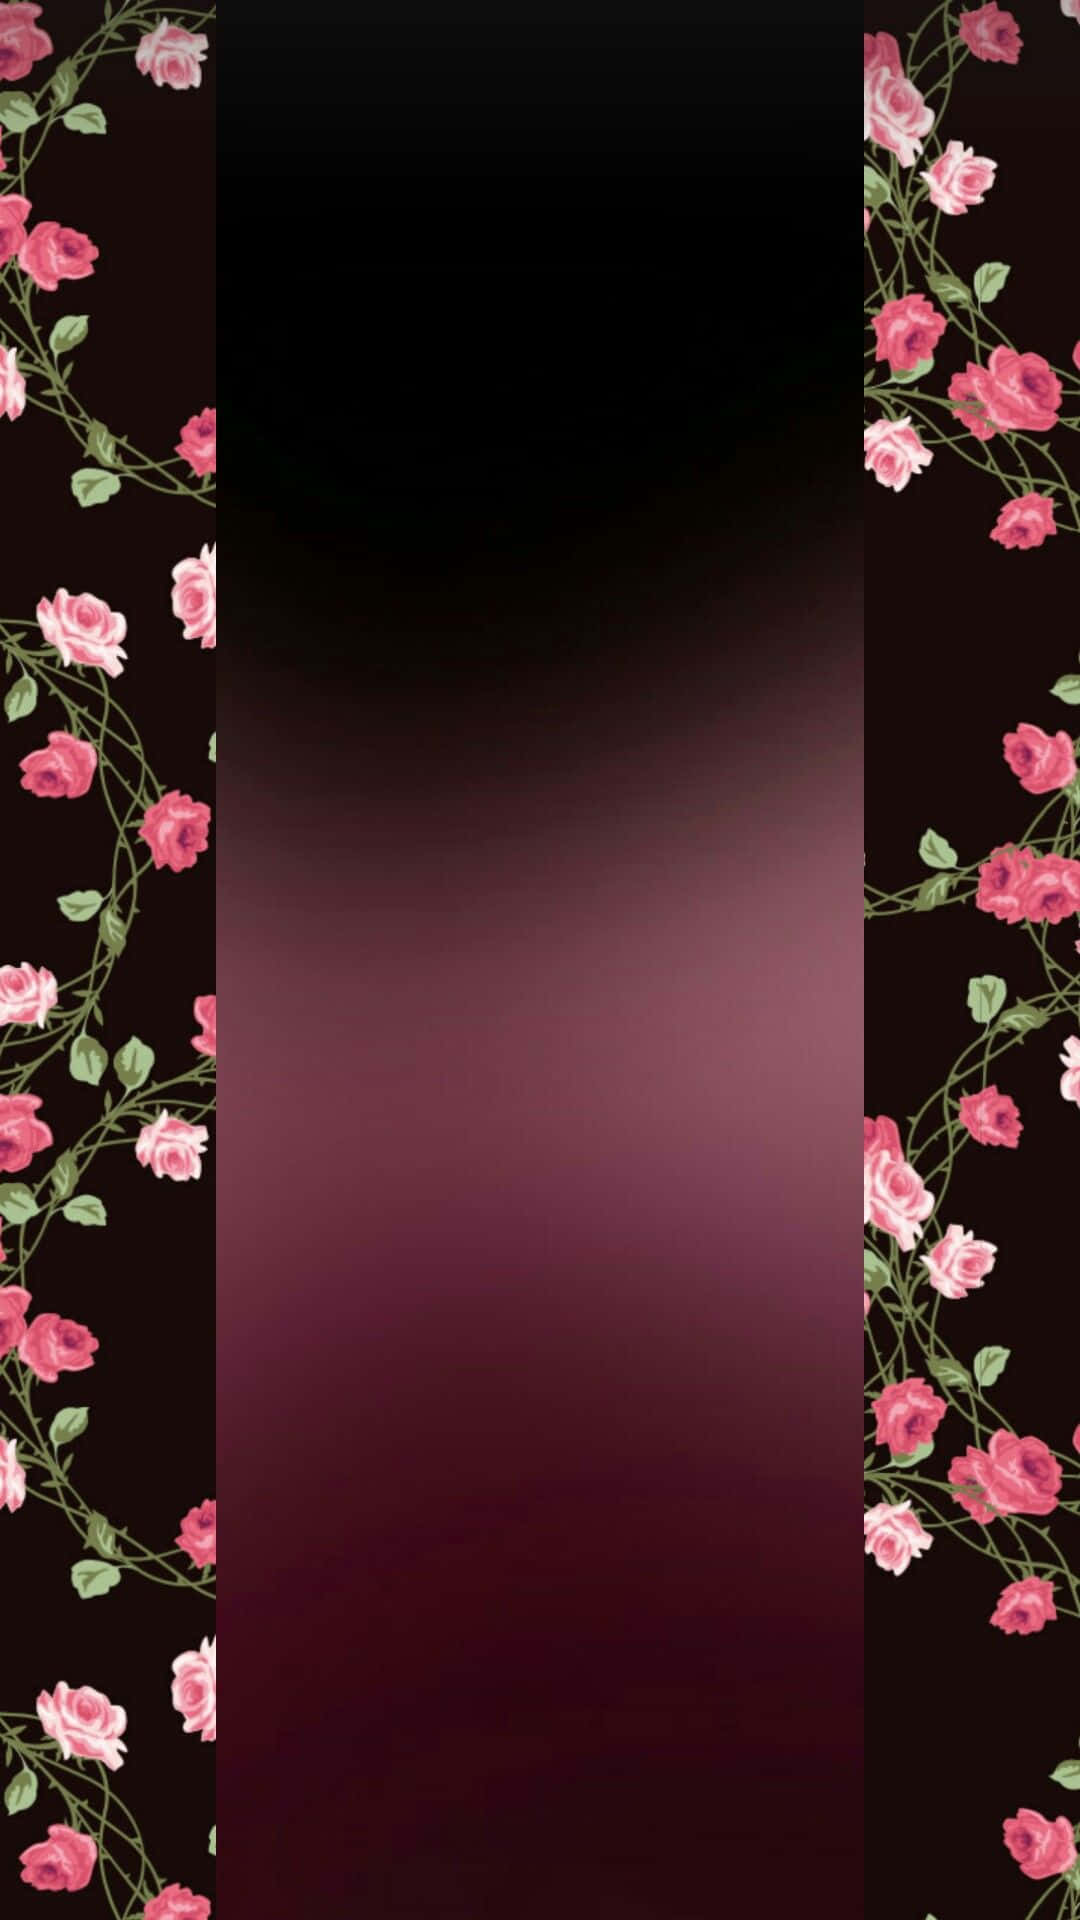 Black And Pink Flower Borders Wallpaper